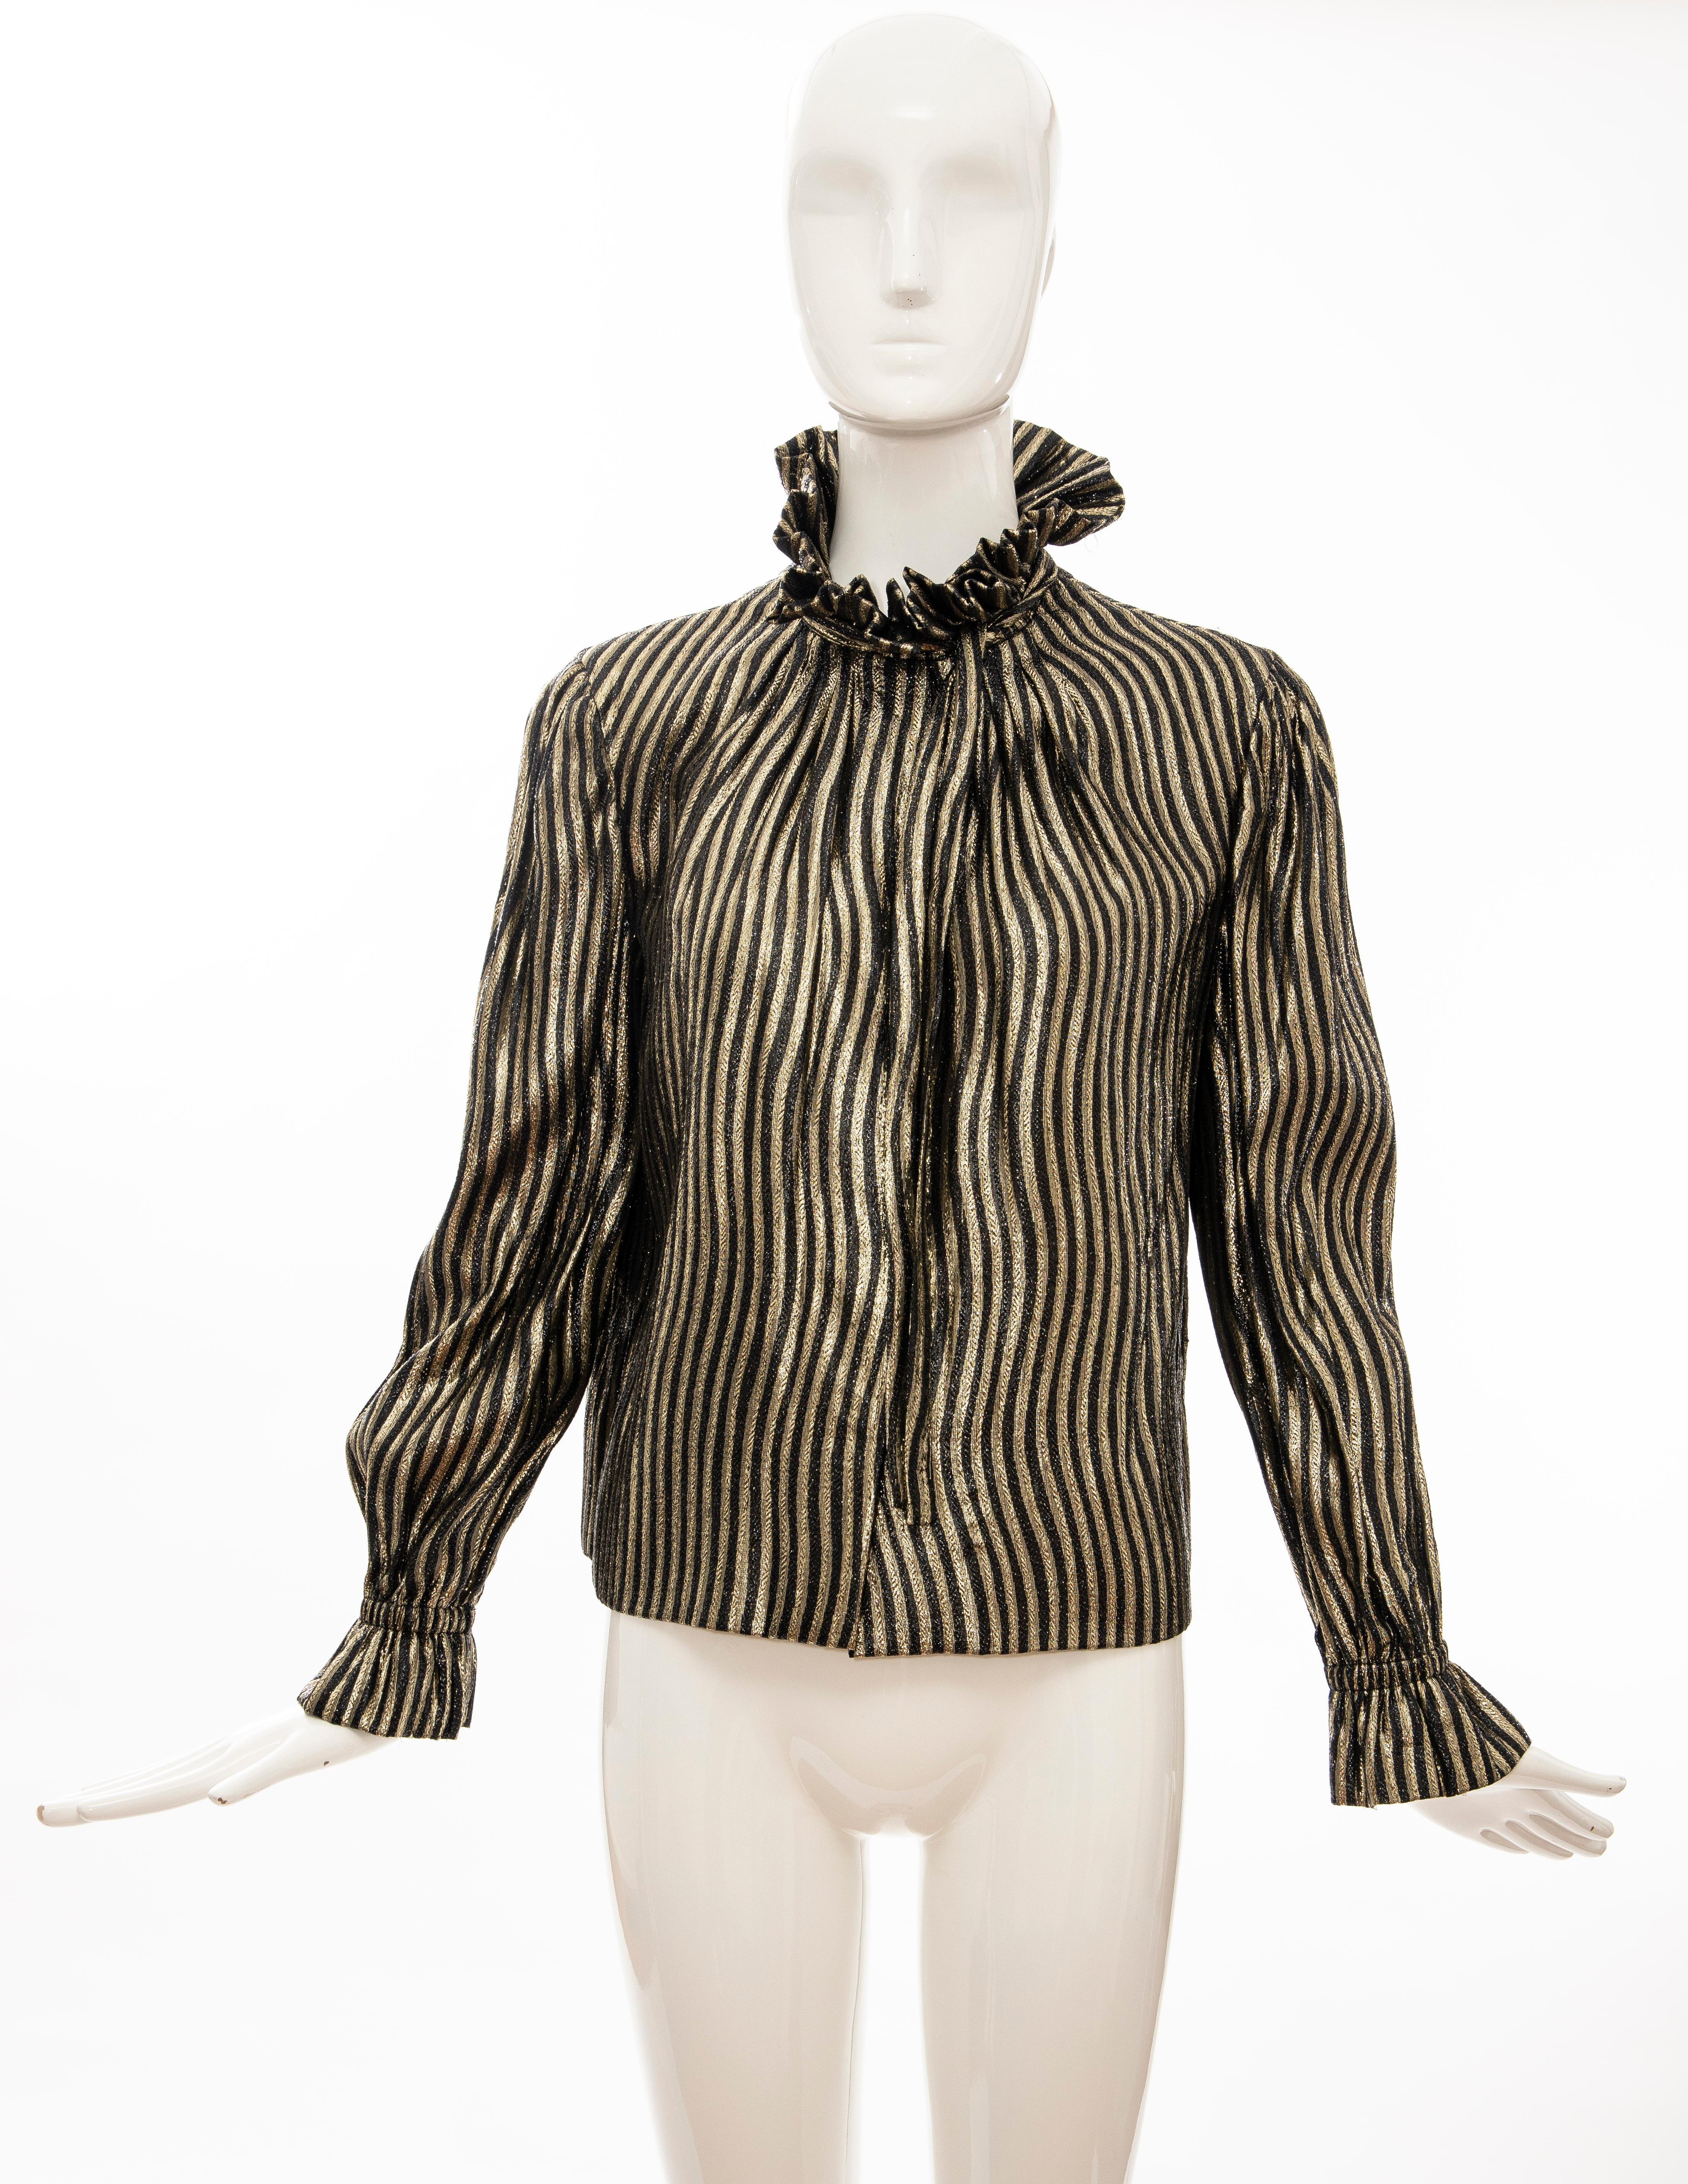 Pauline Trigere Black Gold Striped Metallic Snap Front Blouse, Circa: 1970's In Excellent Condition For Sale In Cincinnati, OH